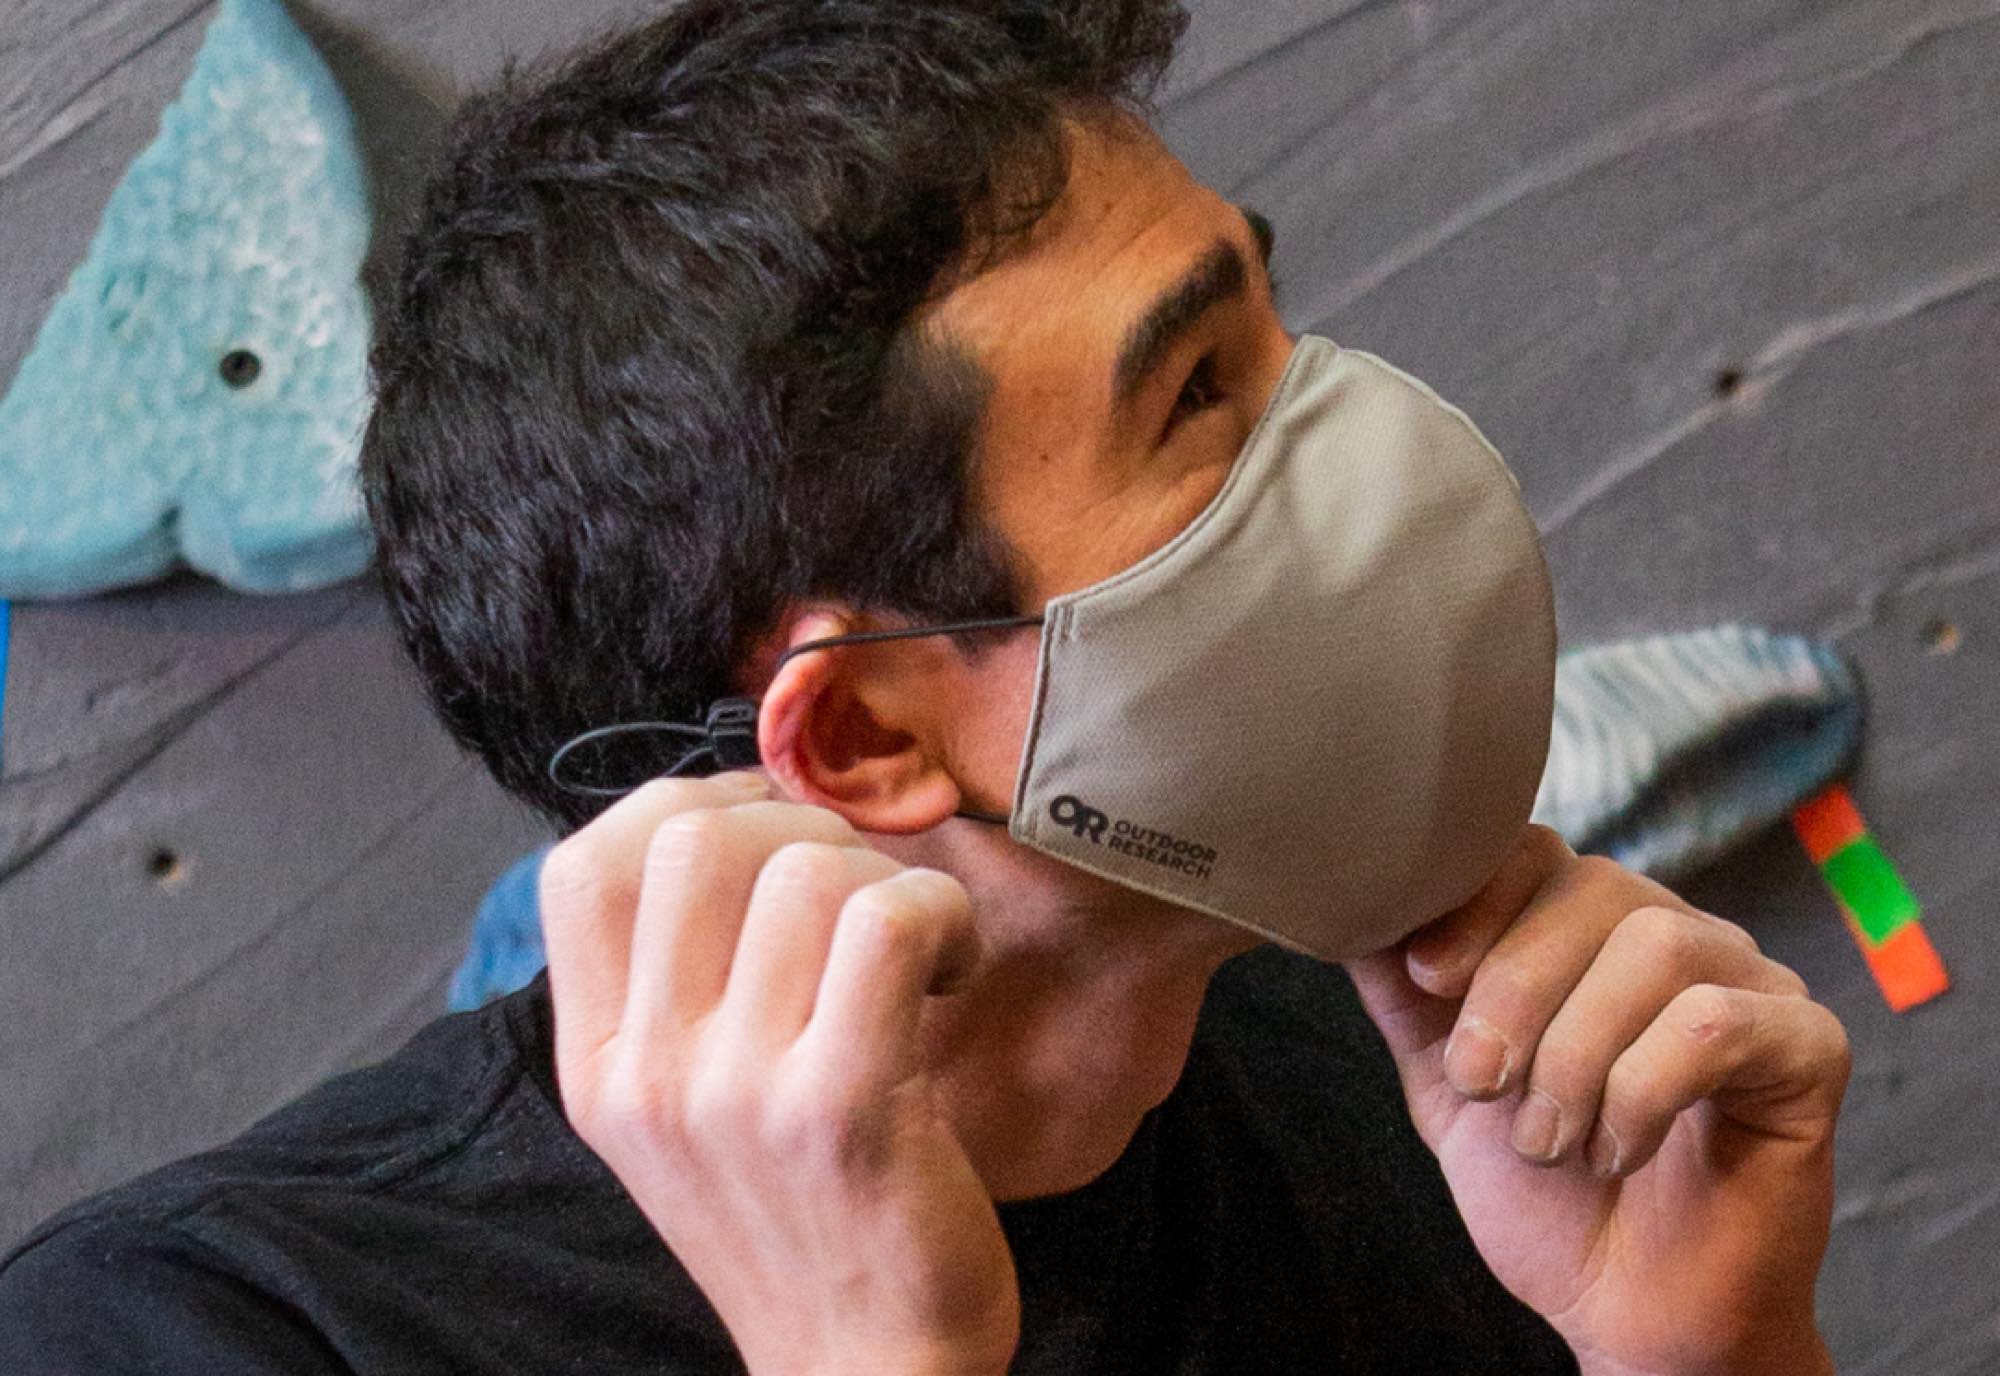 Keenan Takahashi adjusts the fit of the Outdoor Research Essential Face Mask before attempting an indoor boulder problem.